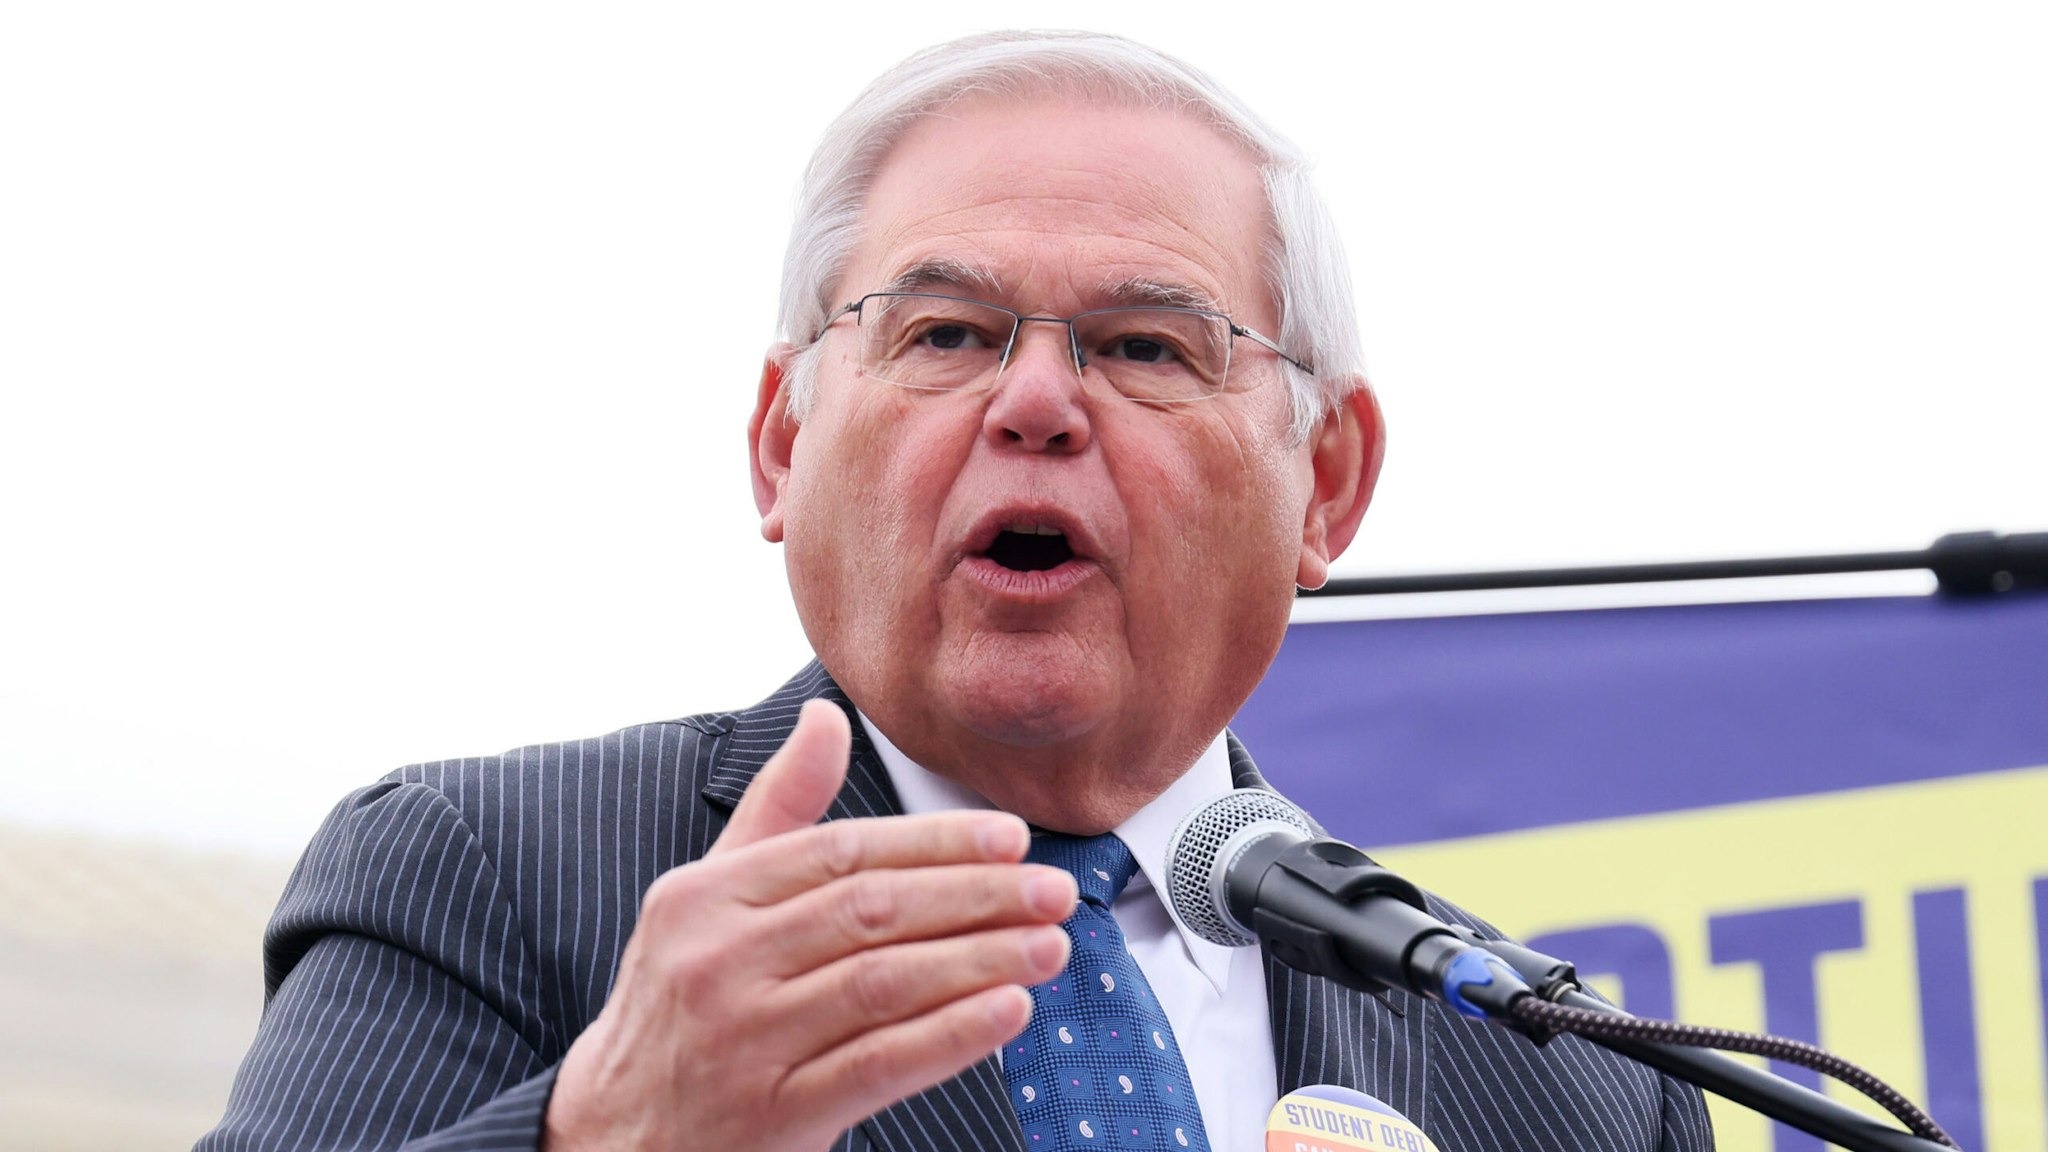 WASHINGTON, DC - FEBRUARY 28: Senator Robert Menendez speaks as student loan borrowers and advocates gather for the People's Rally To Cancel Student Debt During The Supreme Court Hearings On Student Debt Relief on February 28, 2023 in Washington, DC.